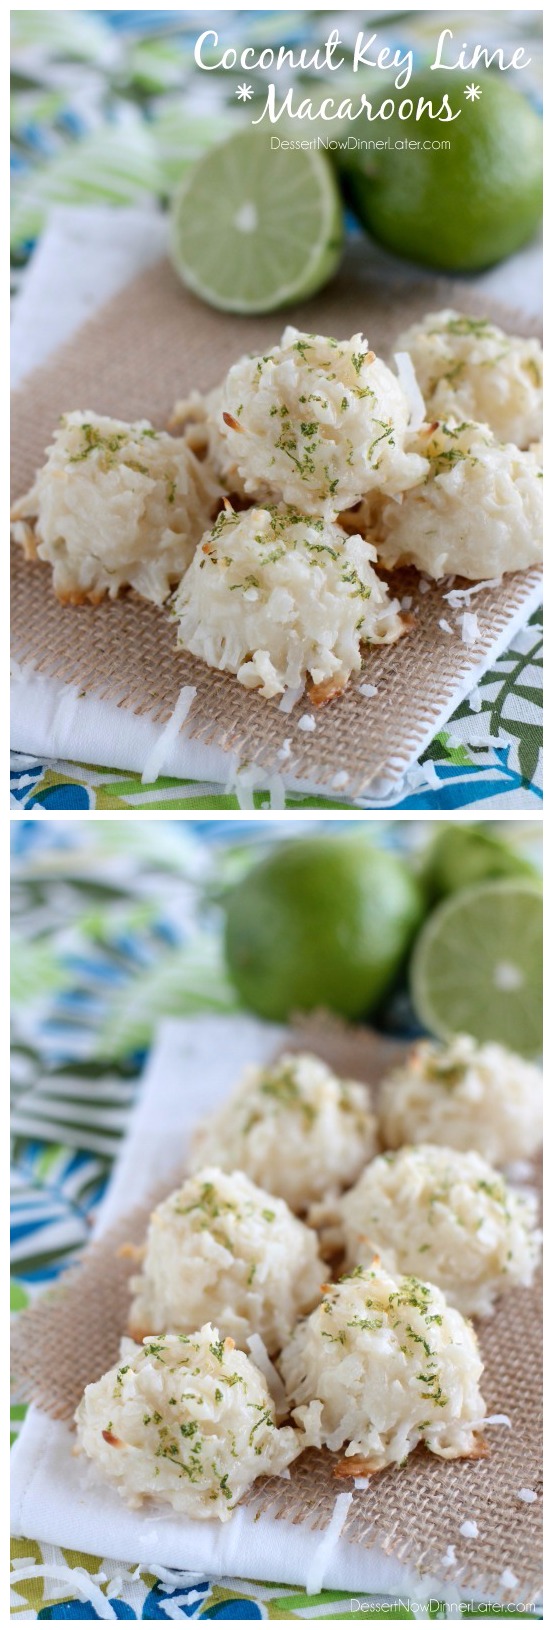 Coconut Key Lime Macaroons